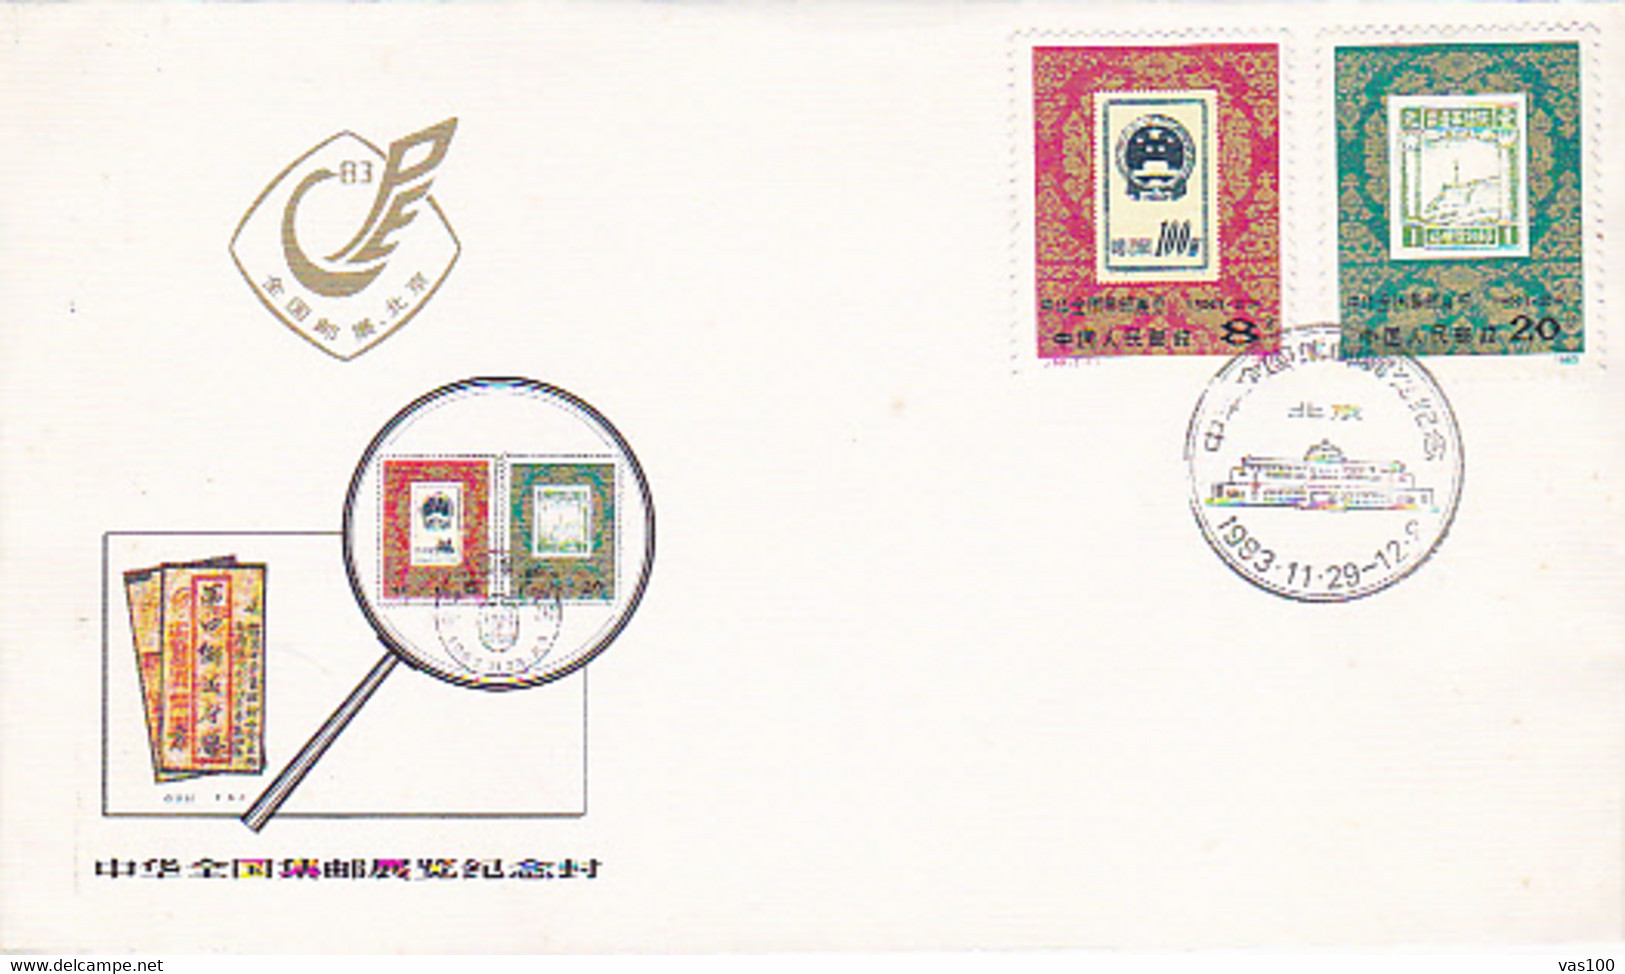 BEIJING NATIONAL PHILATELIC EXHIBITION, COVER FDC, 1983, CHINA - 1980-1989